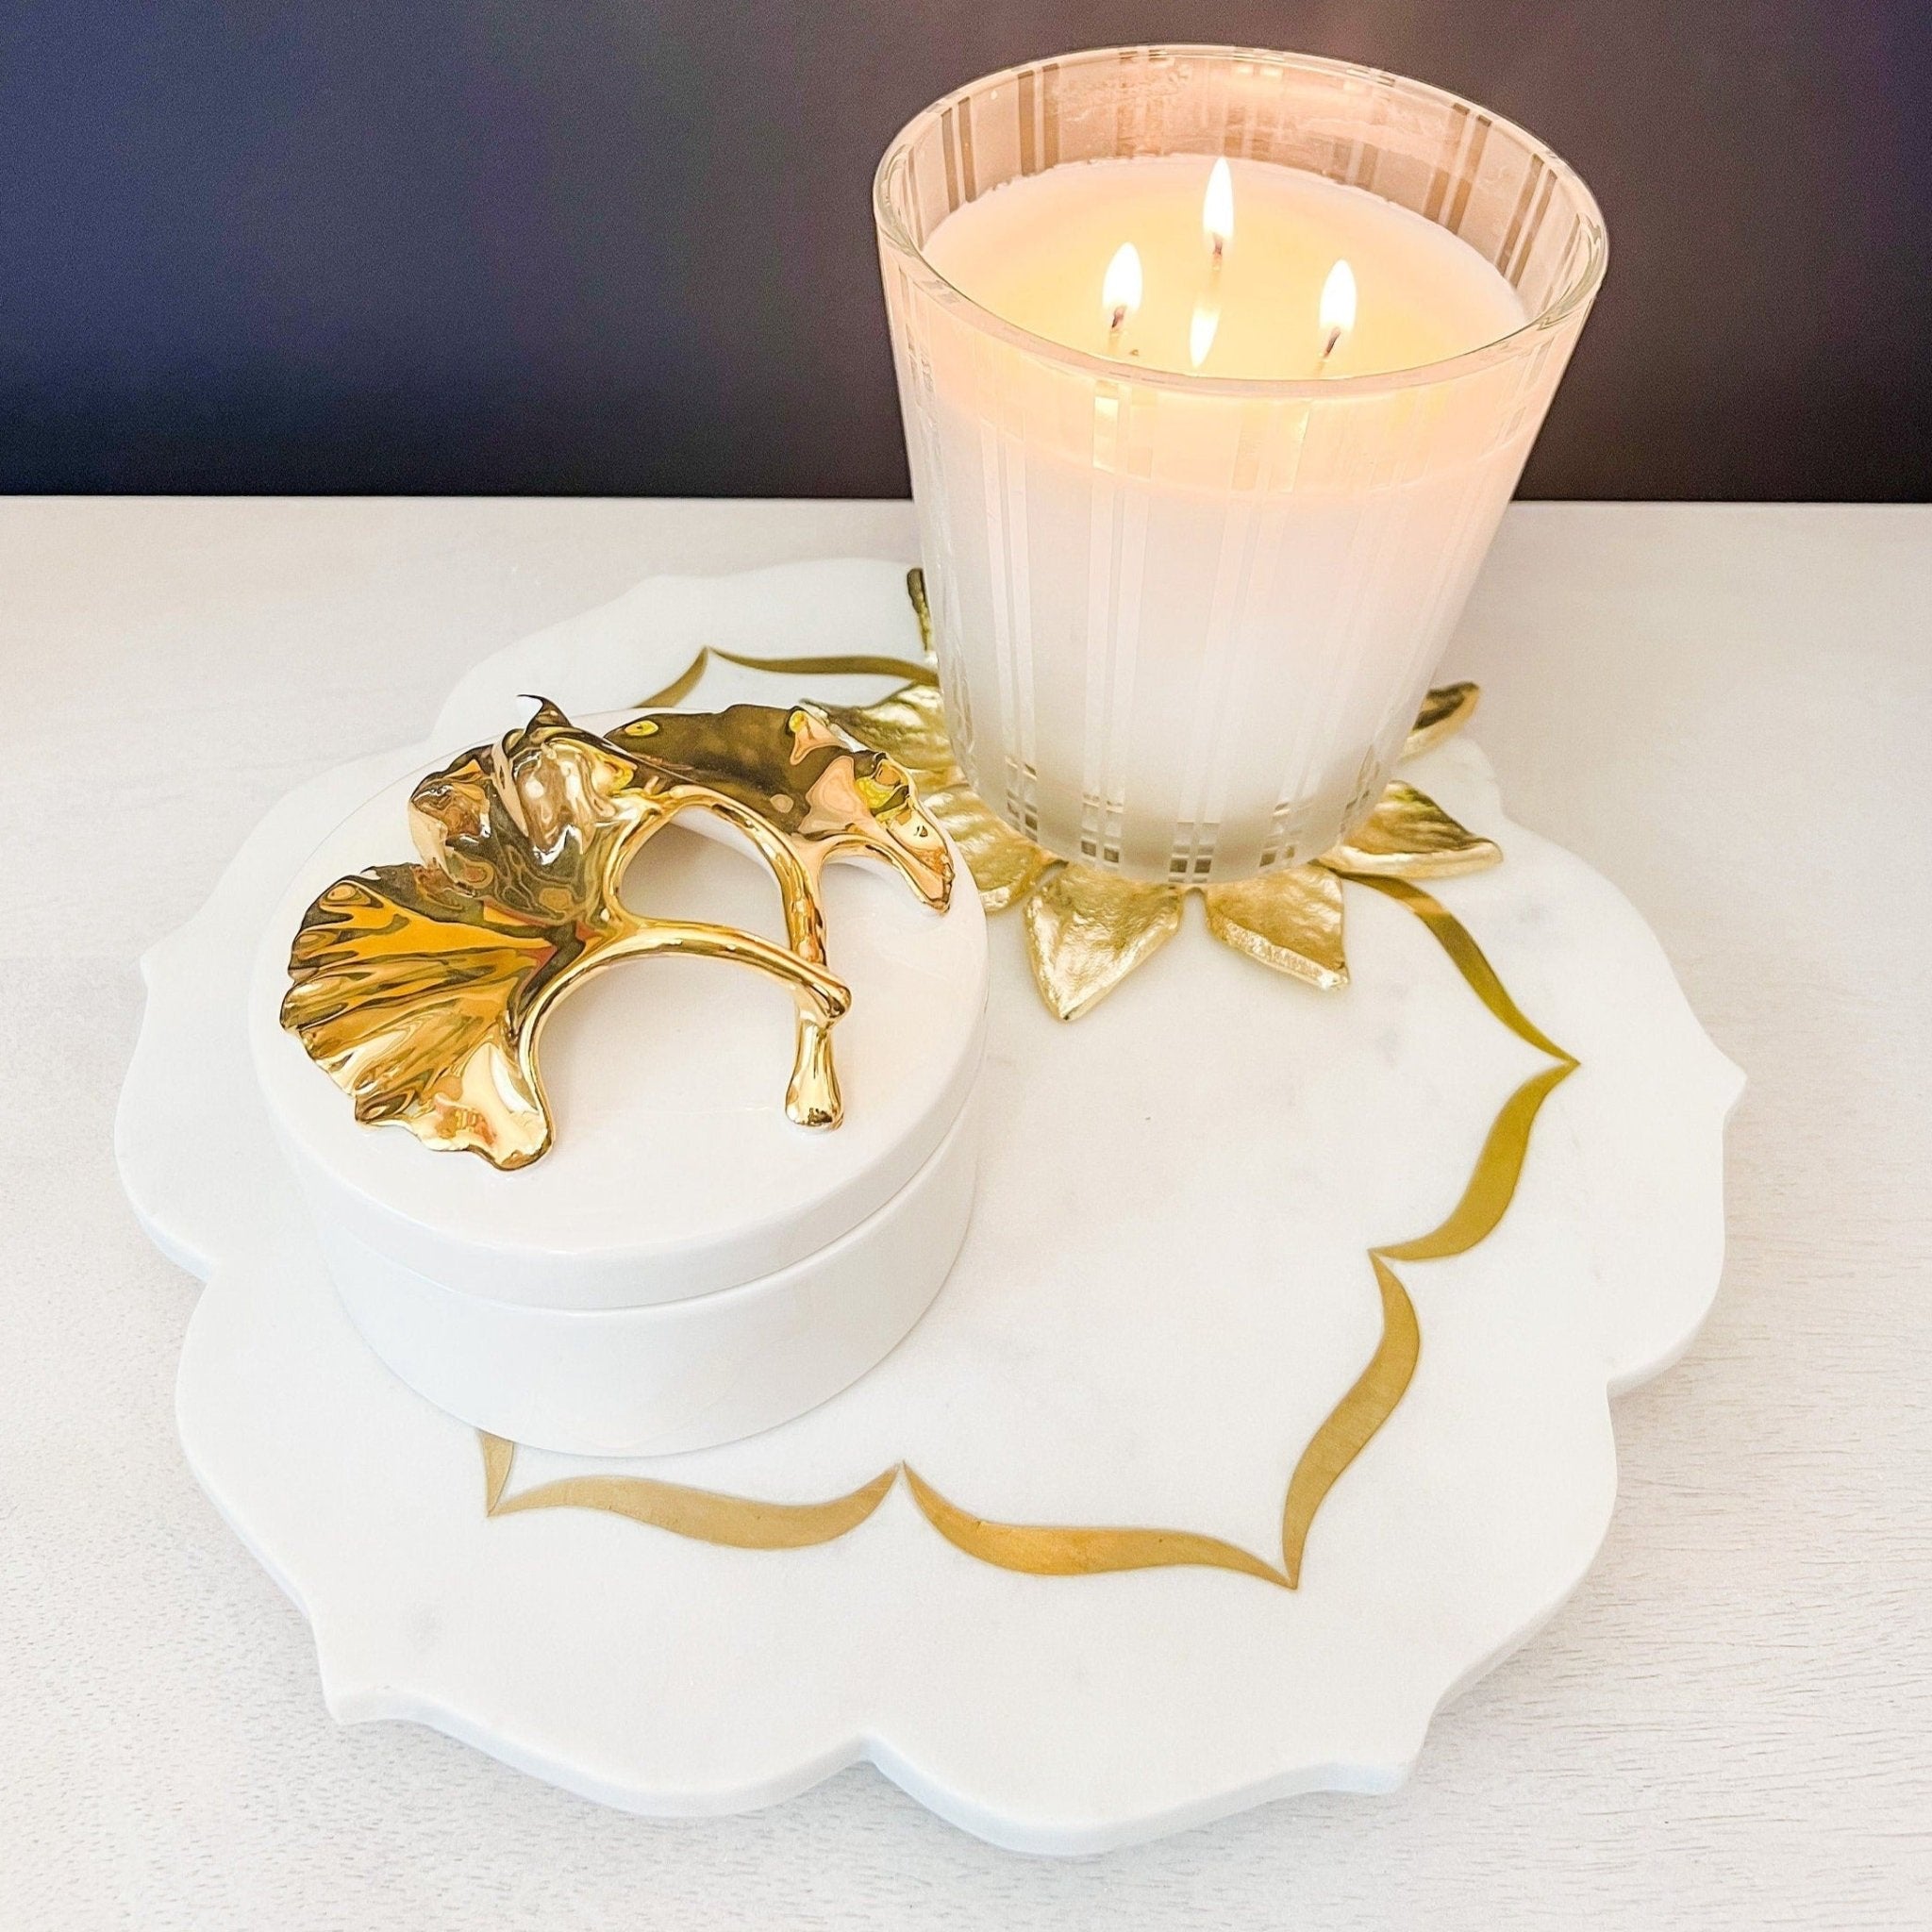 White Marble with Gold Inlay Pedestal Stand (12") | Decorative Tray | Marble Serving Tray | Large Tray | Pedestal Tray | Housewarming Gift - DiamondValeDecor